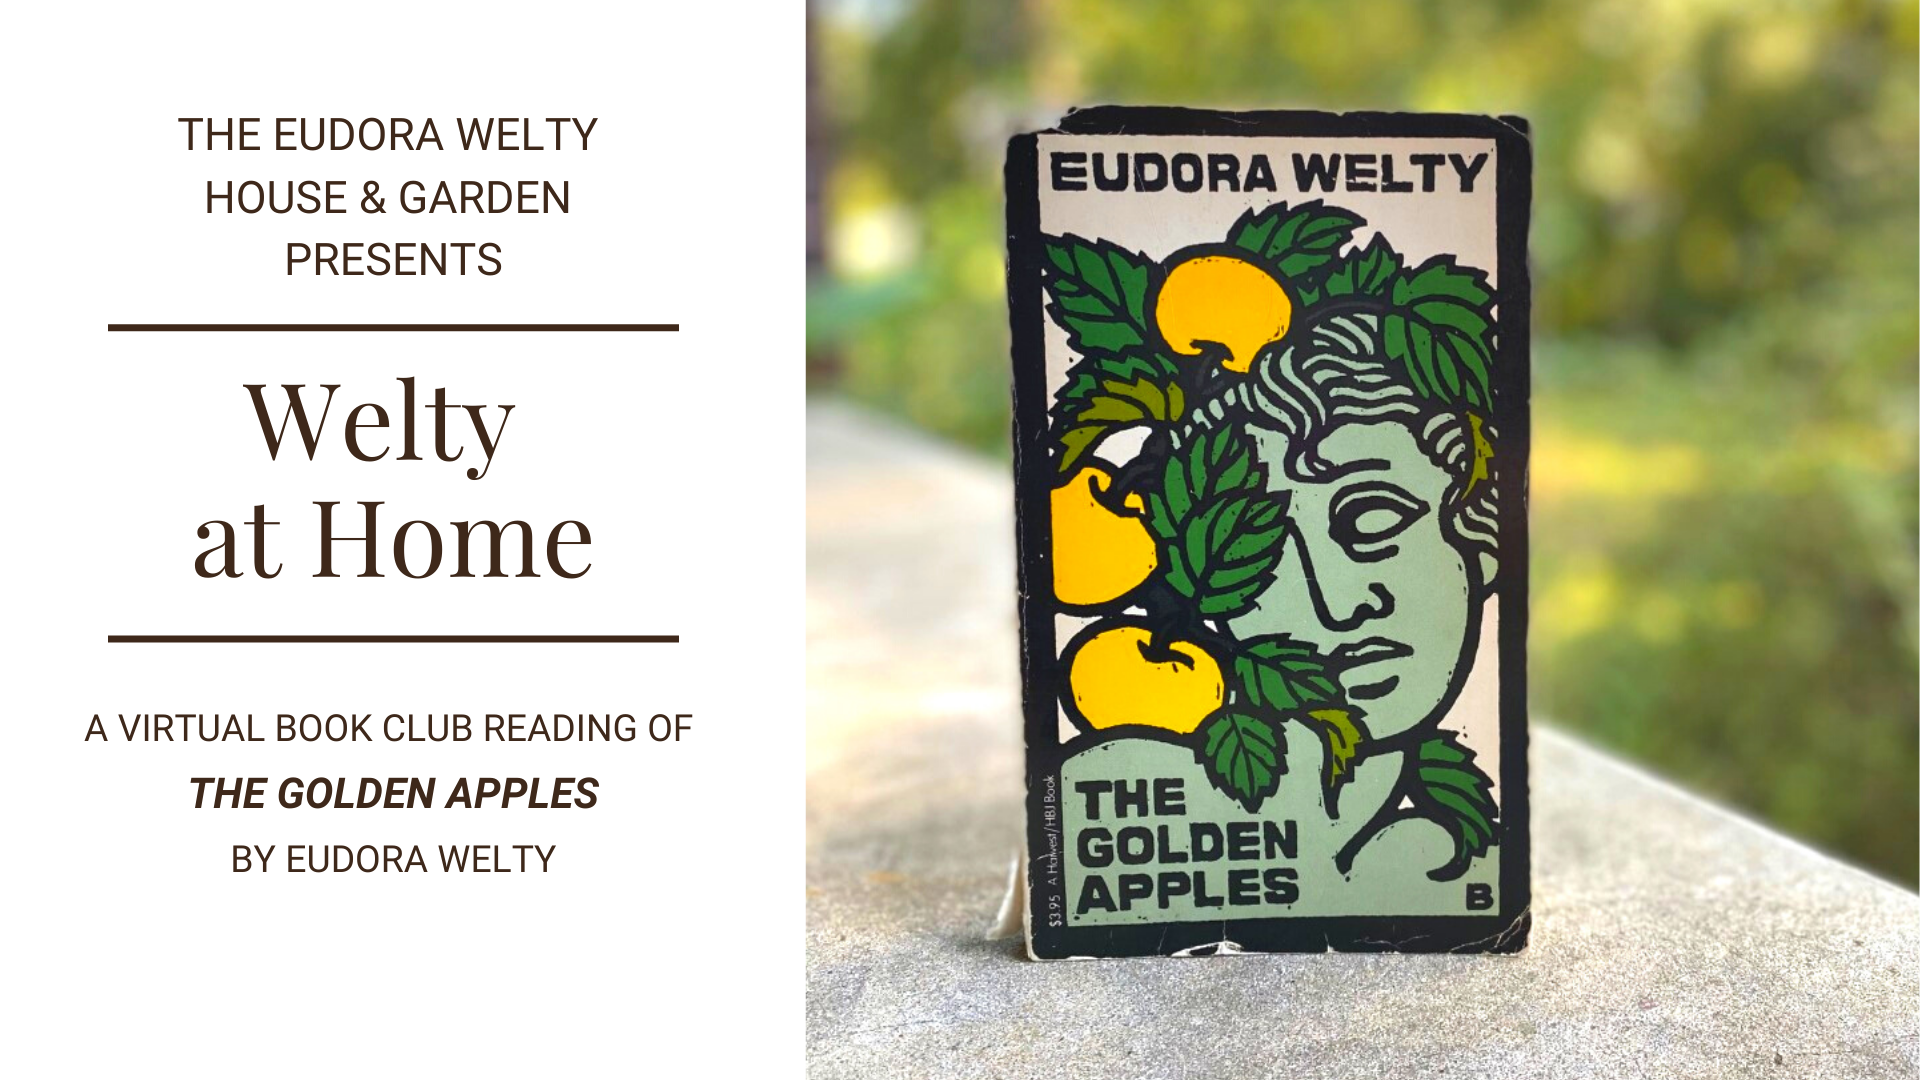 Our Welty at Home Virtual Book Club pick is The Golden Apples, by Eudora Welty.